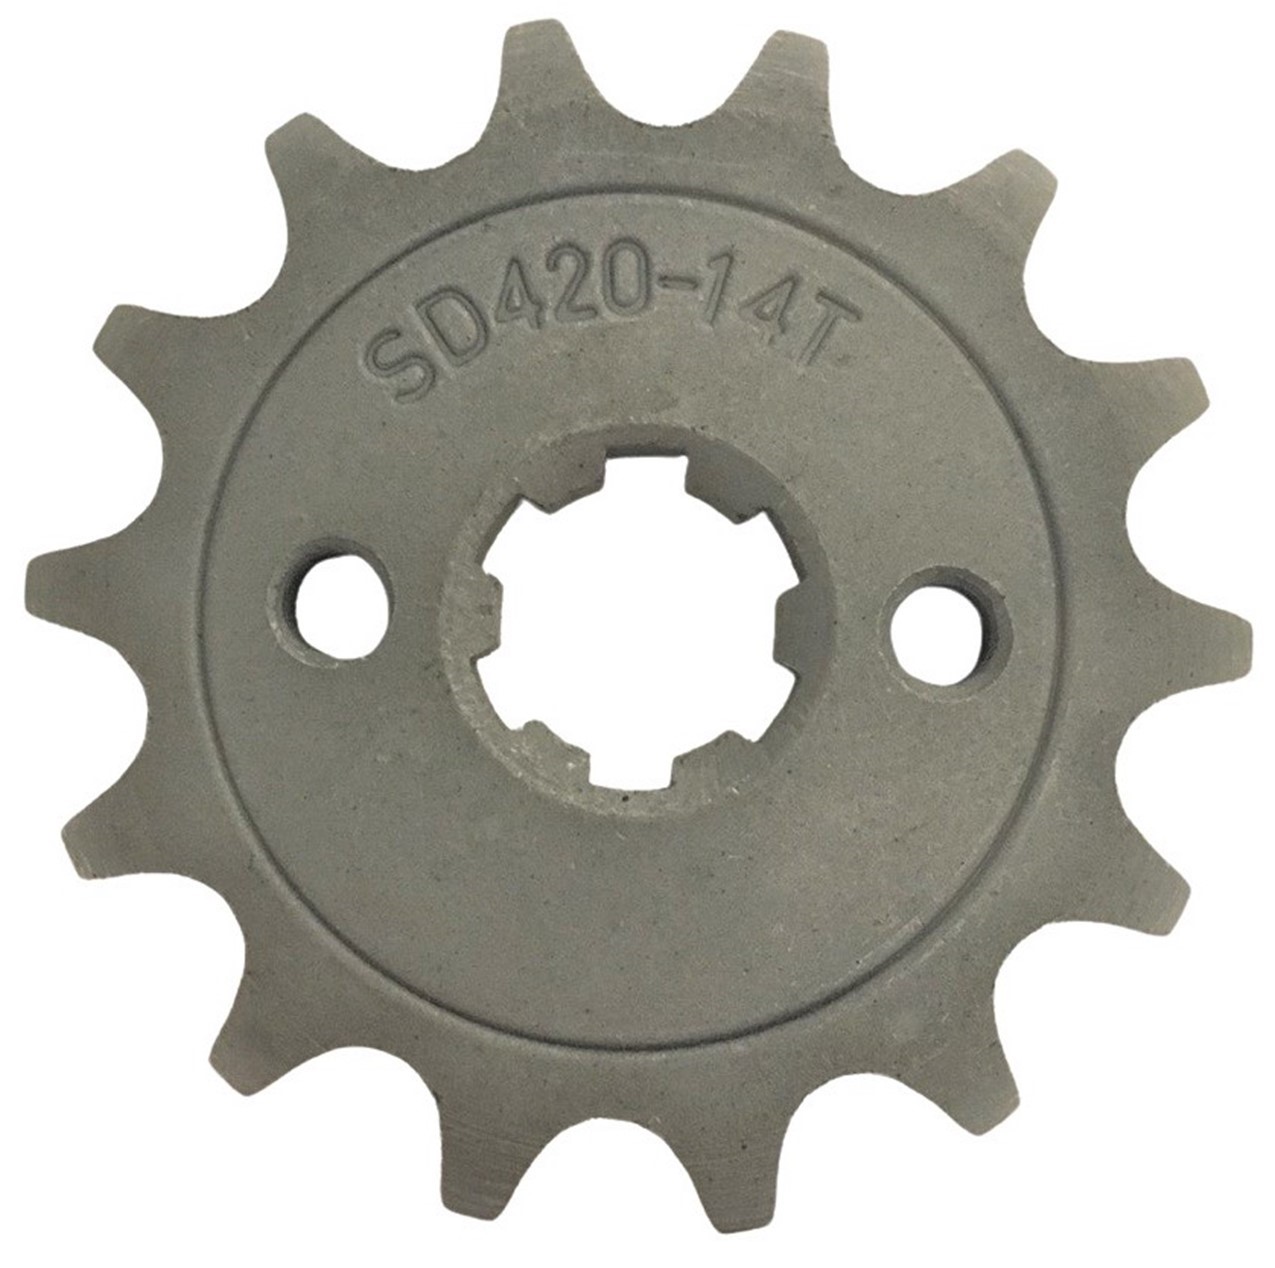 Front Sprocket #420 14th Bolts=2x30mm Ctr to Ctr, Splines=6 Shaft=14/17mm (shortest/longest point) 50-125cc MOST CHINESE ATVs